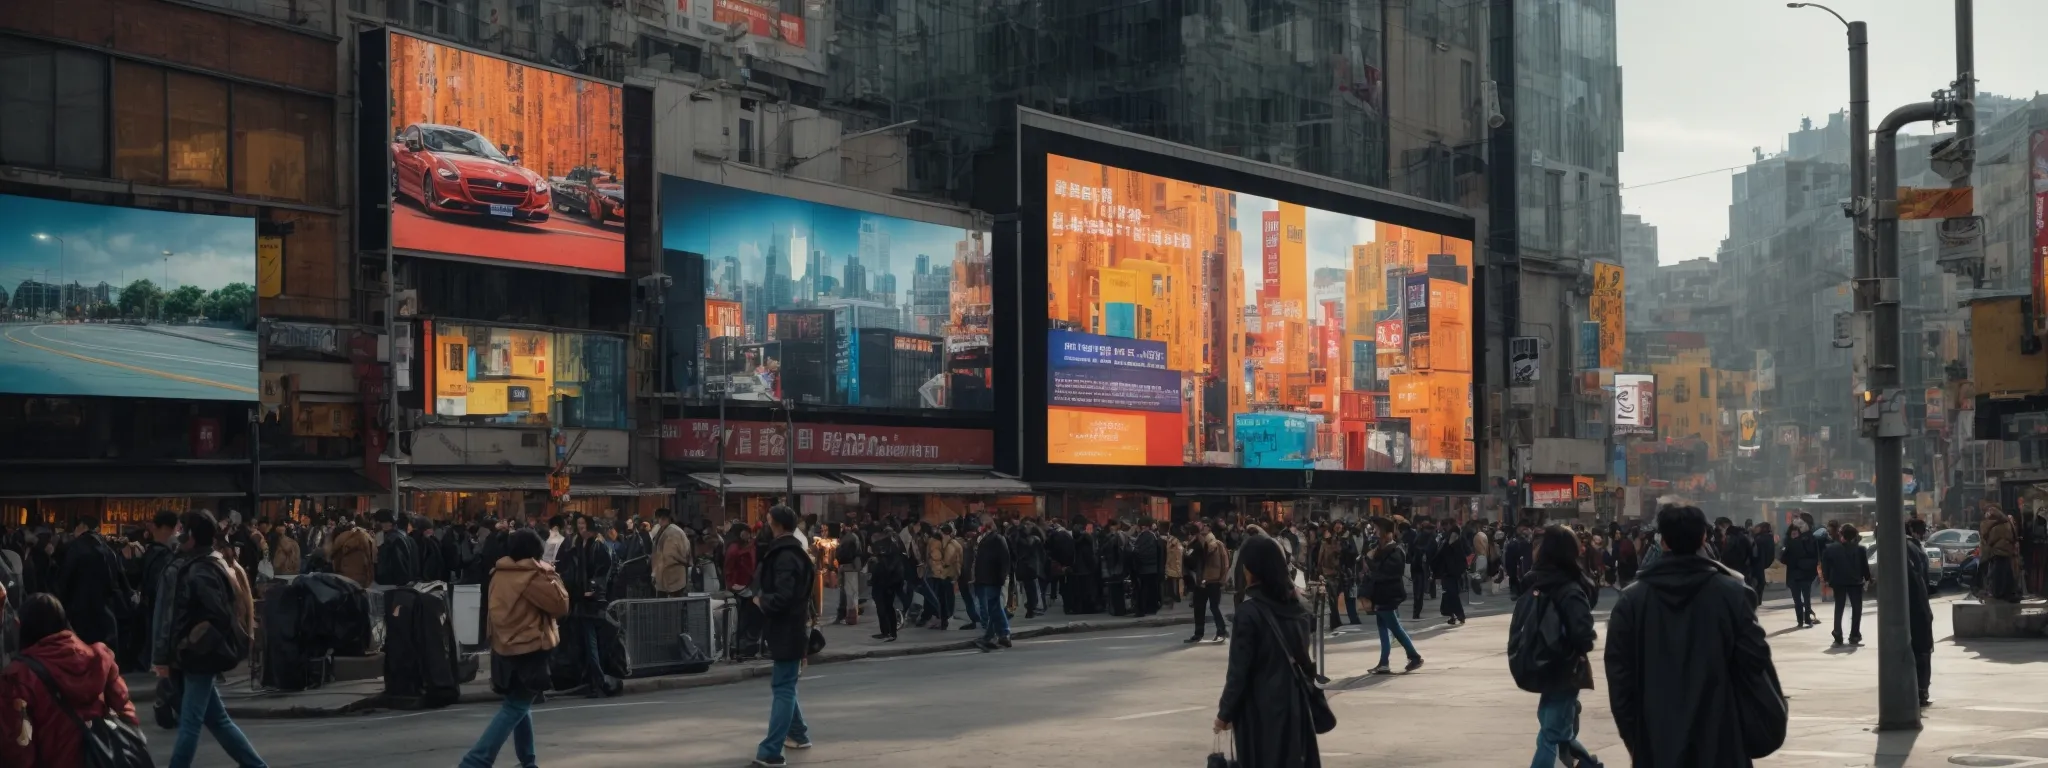 a busy urban street peppered with bright billboards as people attentively watch a large digital screen displaying a modern, colorful advertisement.